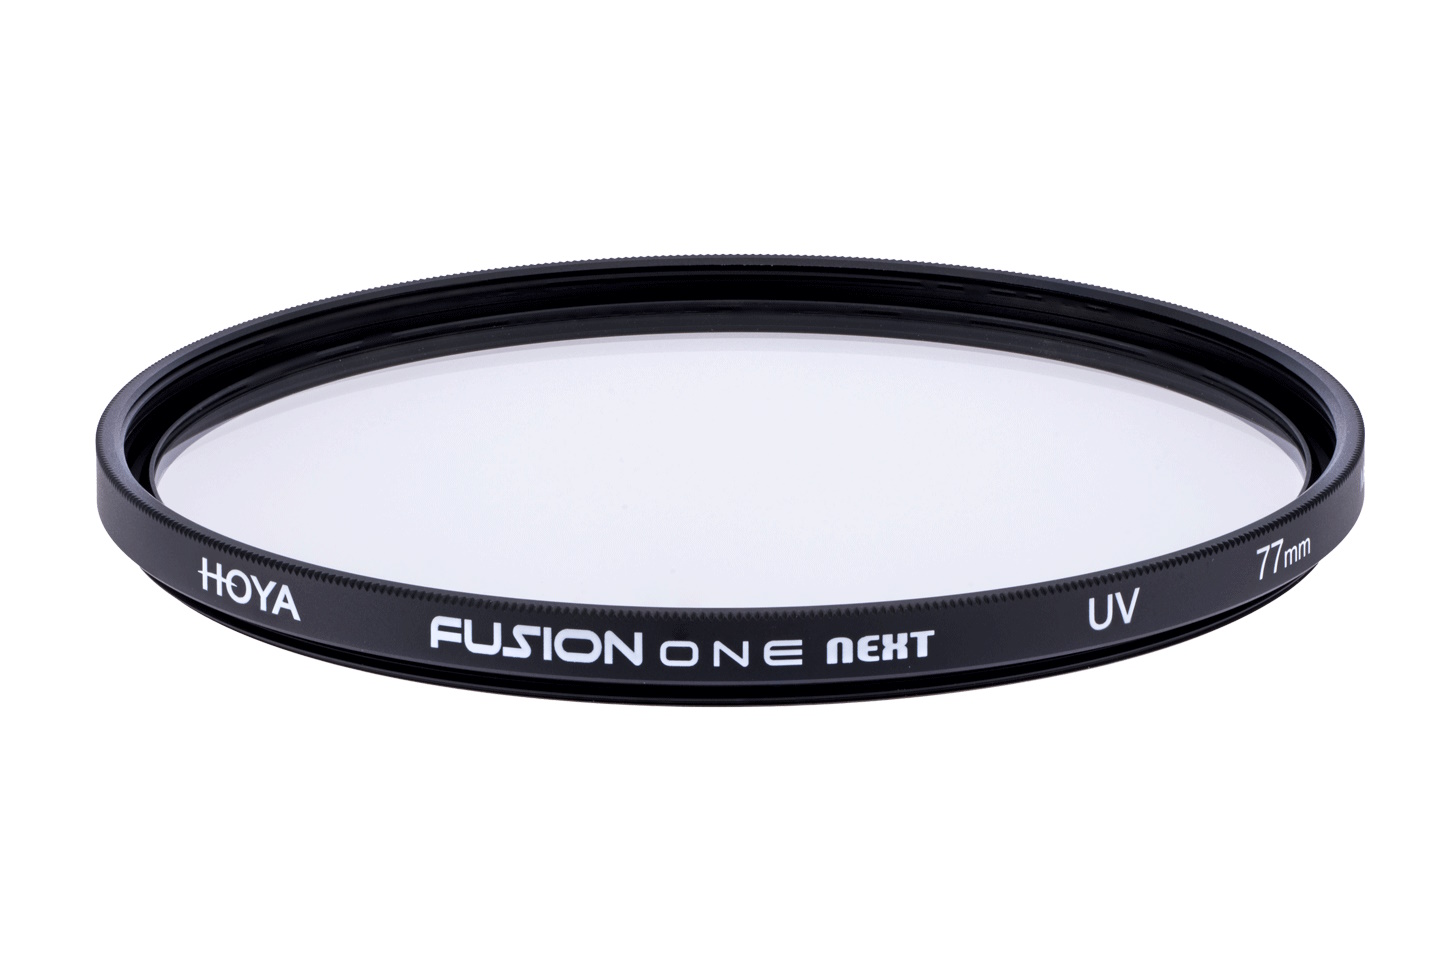 Protector  Fusion One Next 77mm